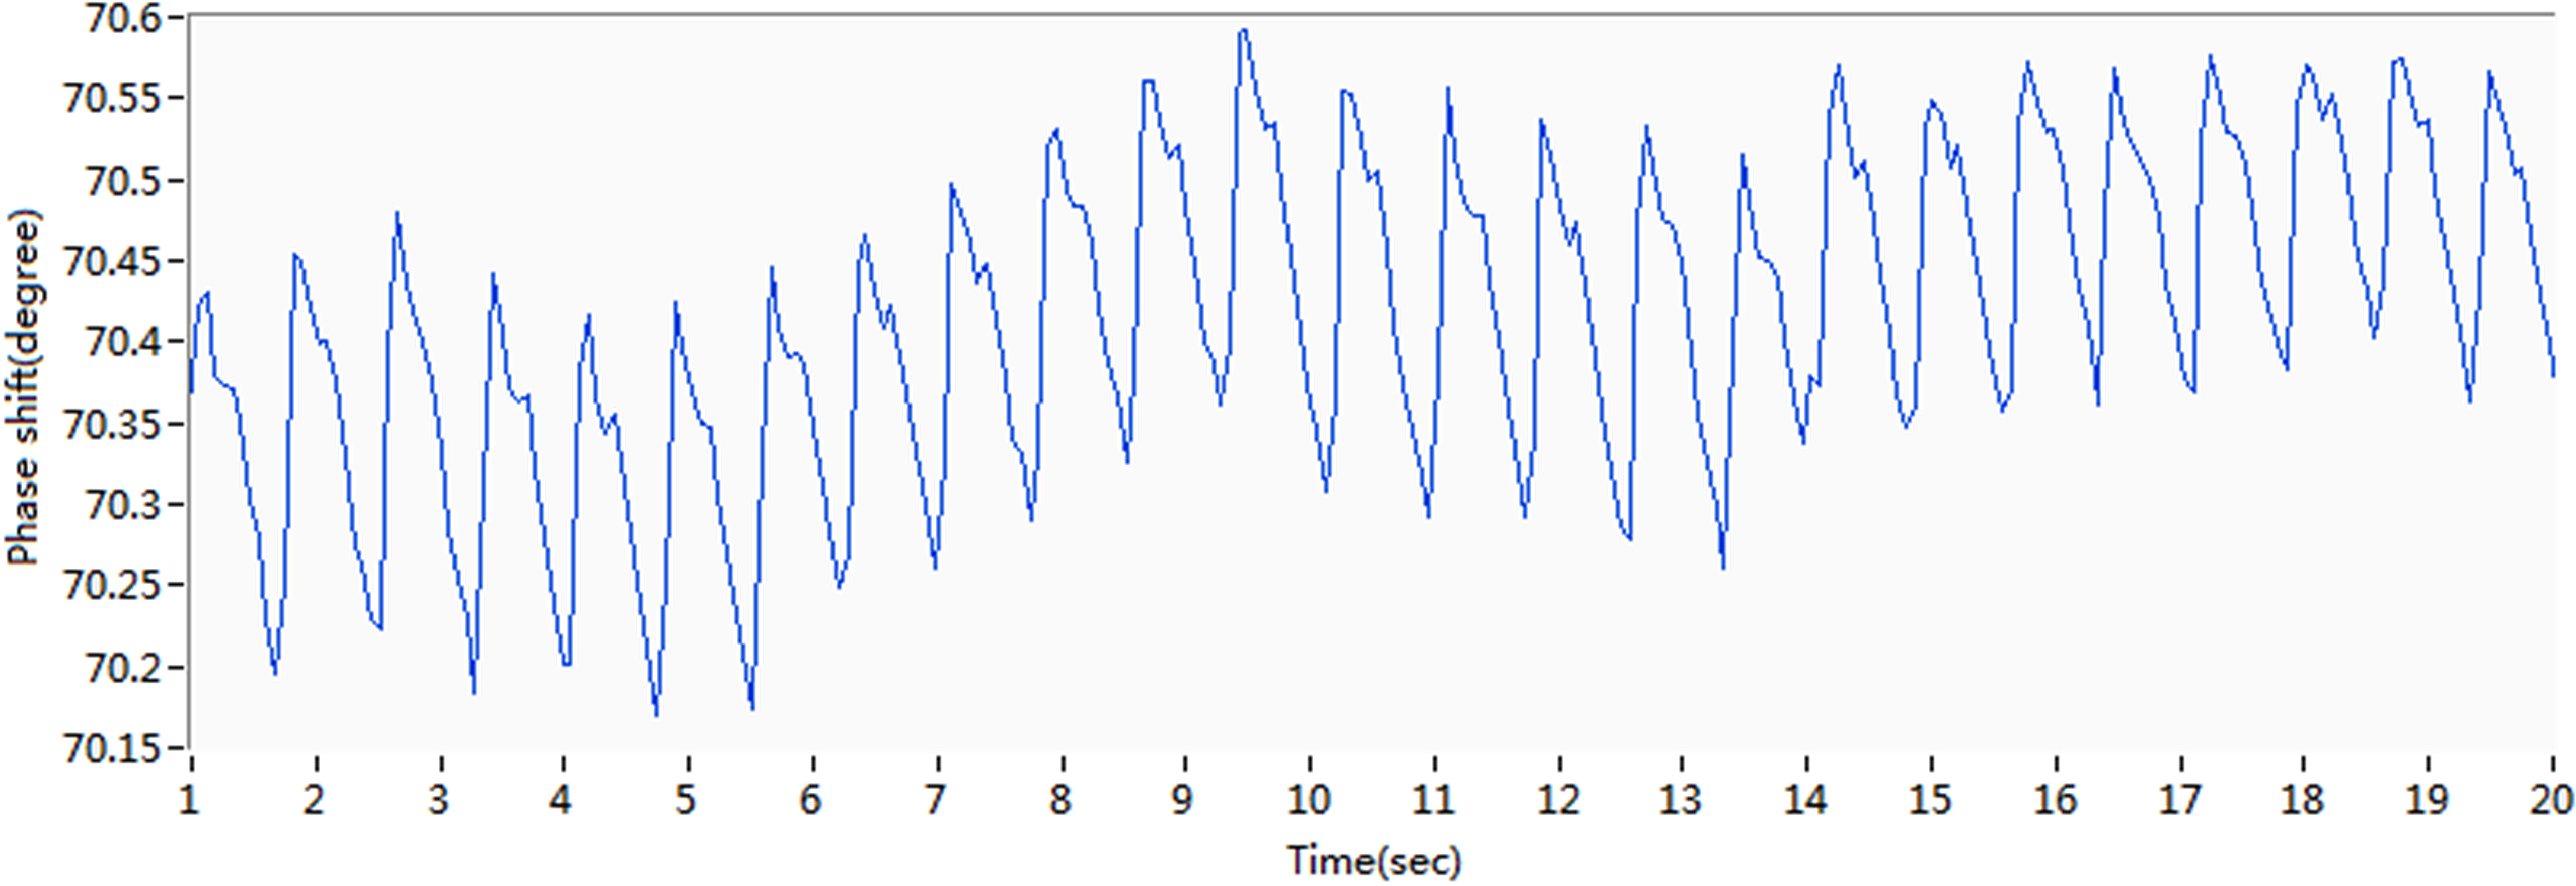 Original phase shift curve for subject 5.